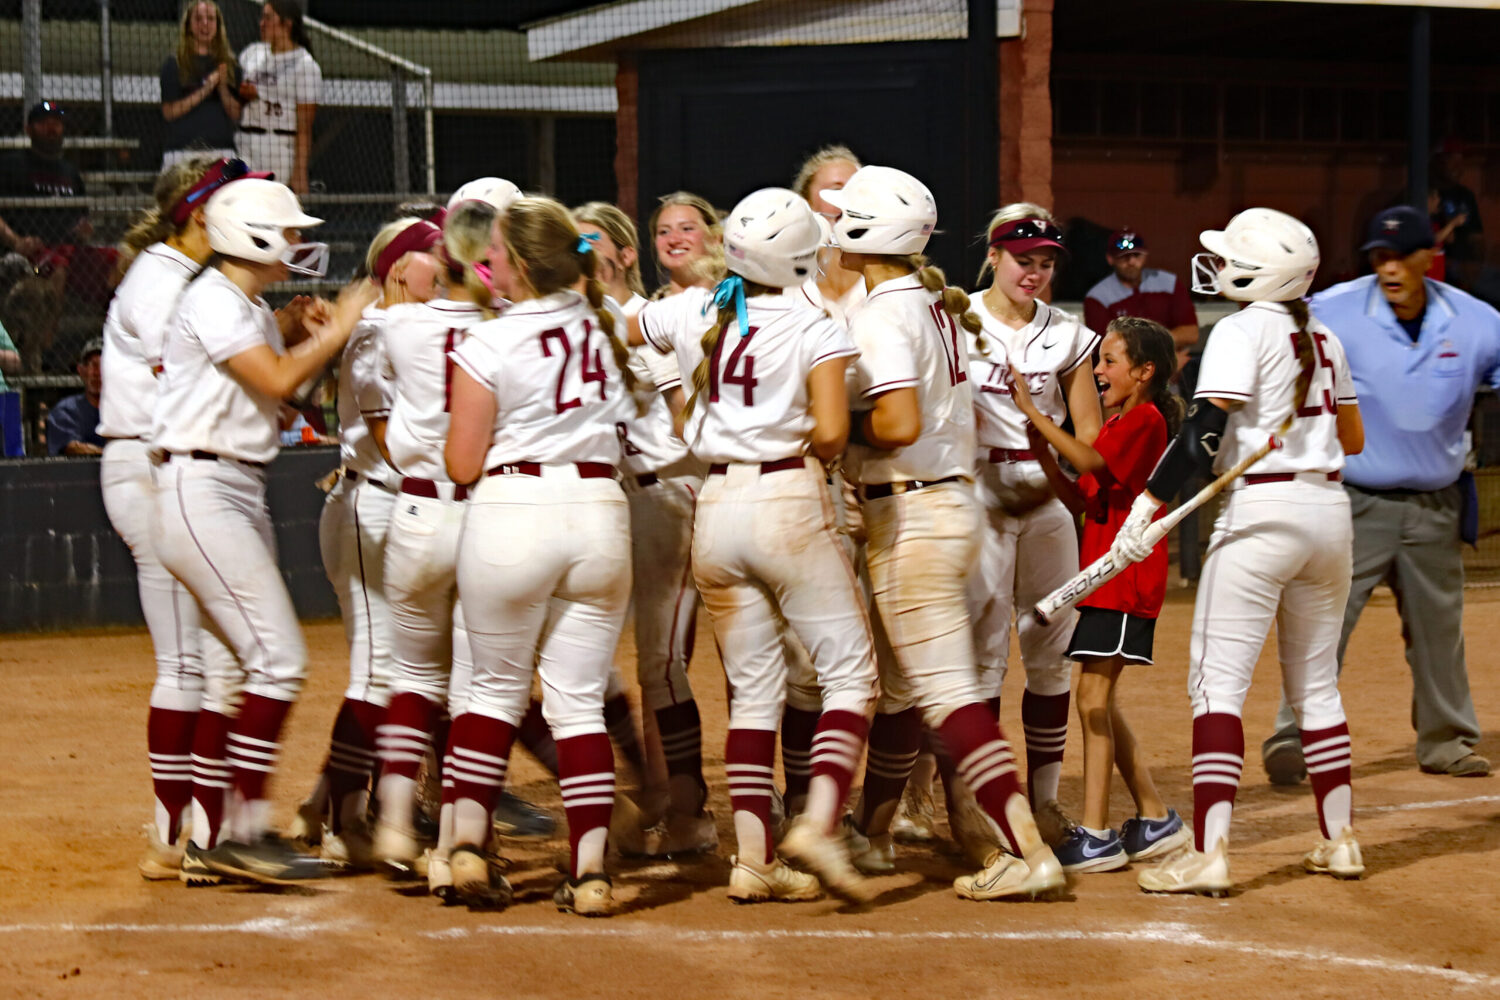 Hartselle players celebrate Katie Norgard’s second home run of the game, a three-run shot that gave the Tigers an 11-10 lead in the bottom of the sixth inning of the Tigers’ 13-10 victory over Athens. Photo by Jim Meadows 